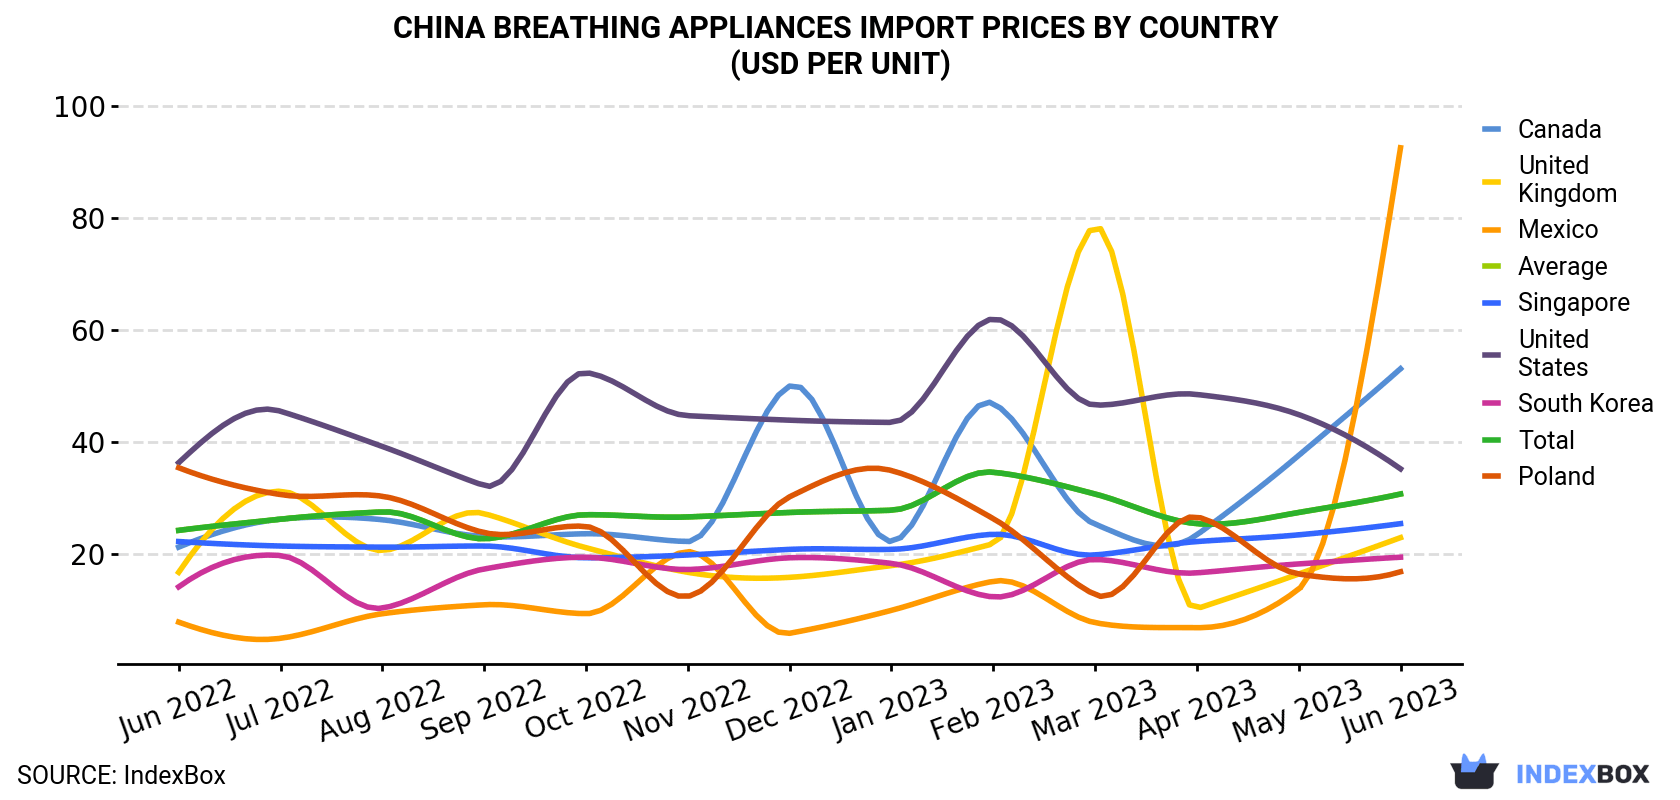 China Breathing Appliances Import Prices By Country (USD Per Unit)